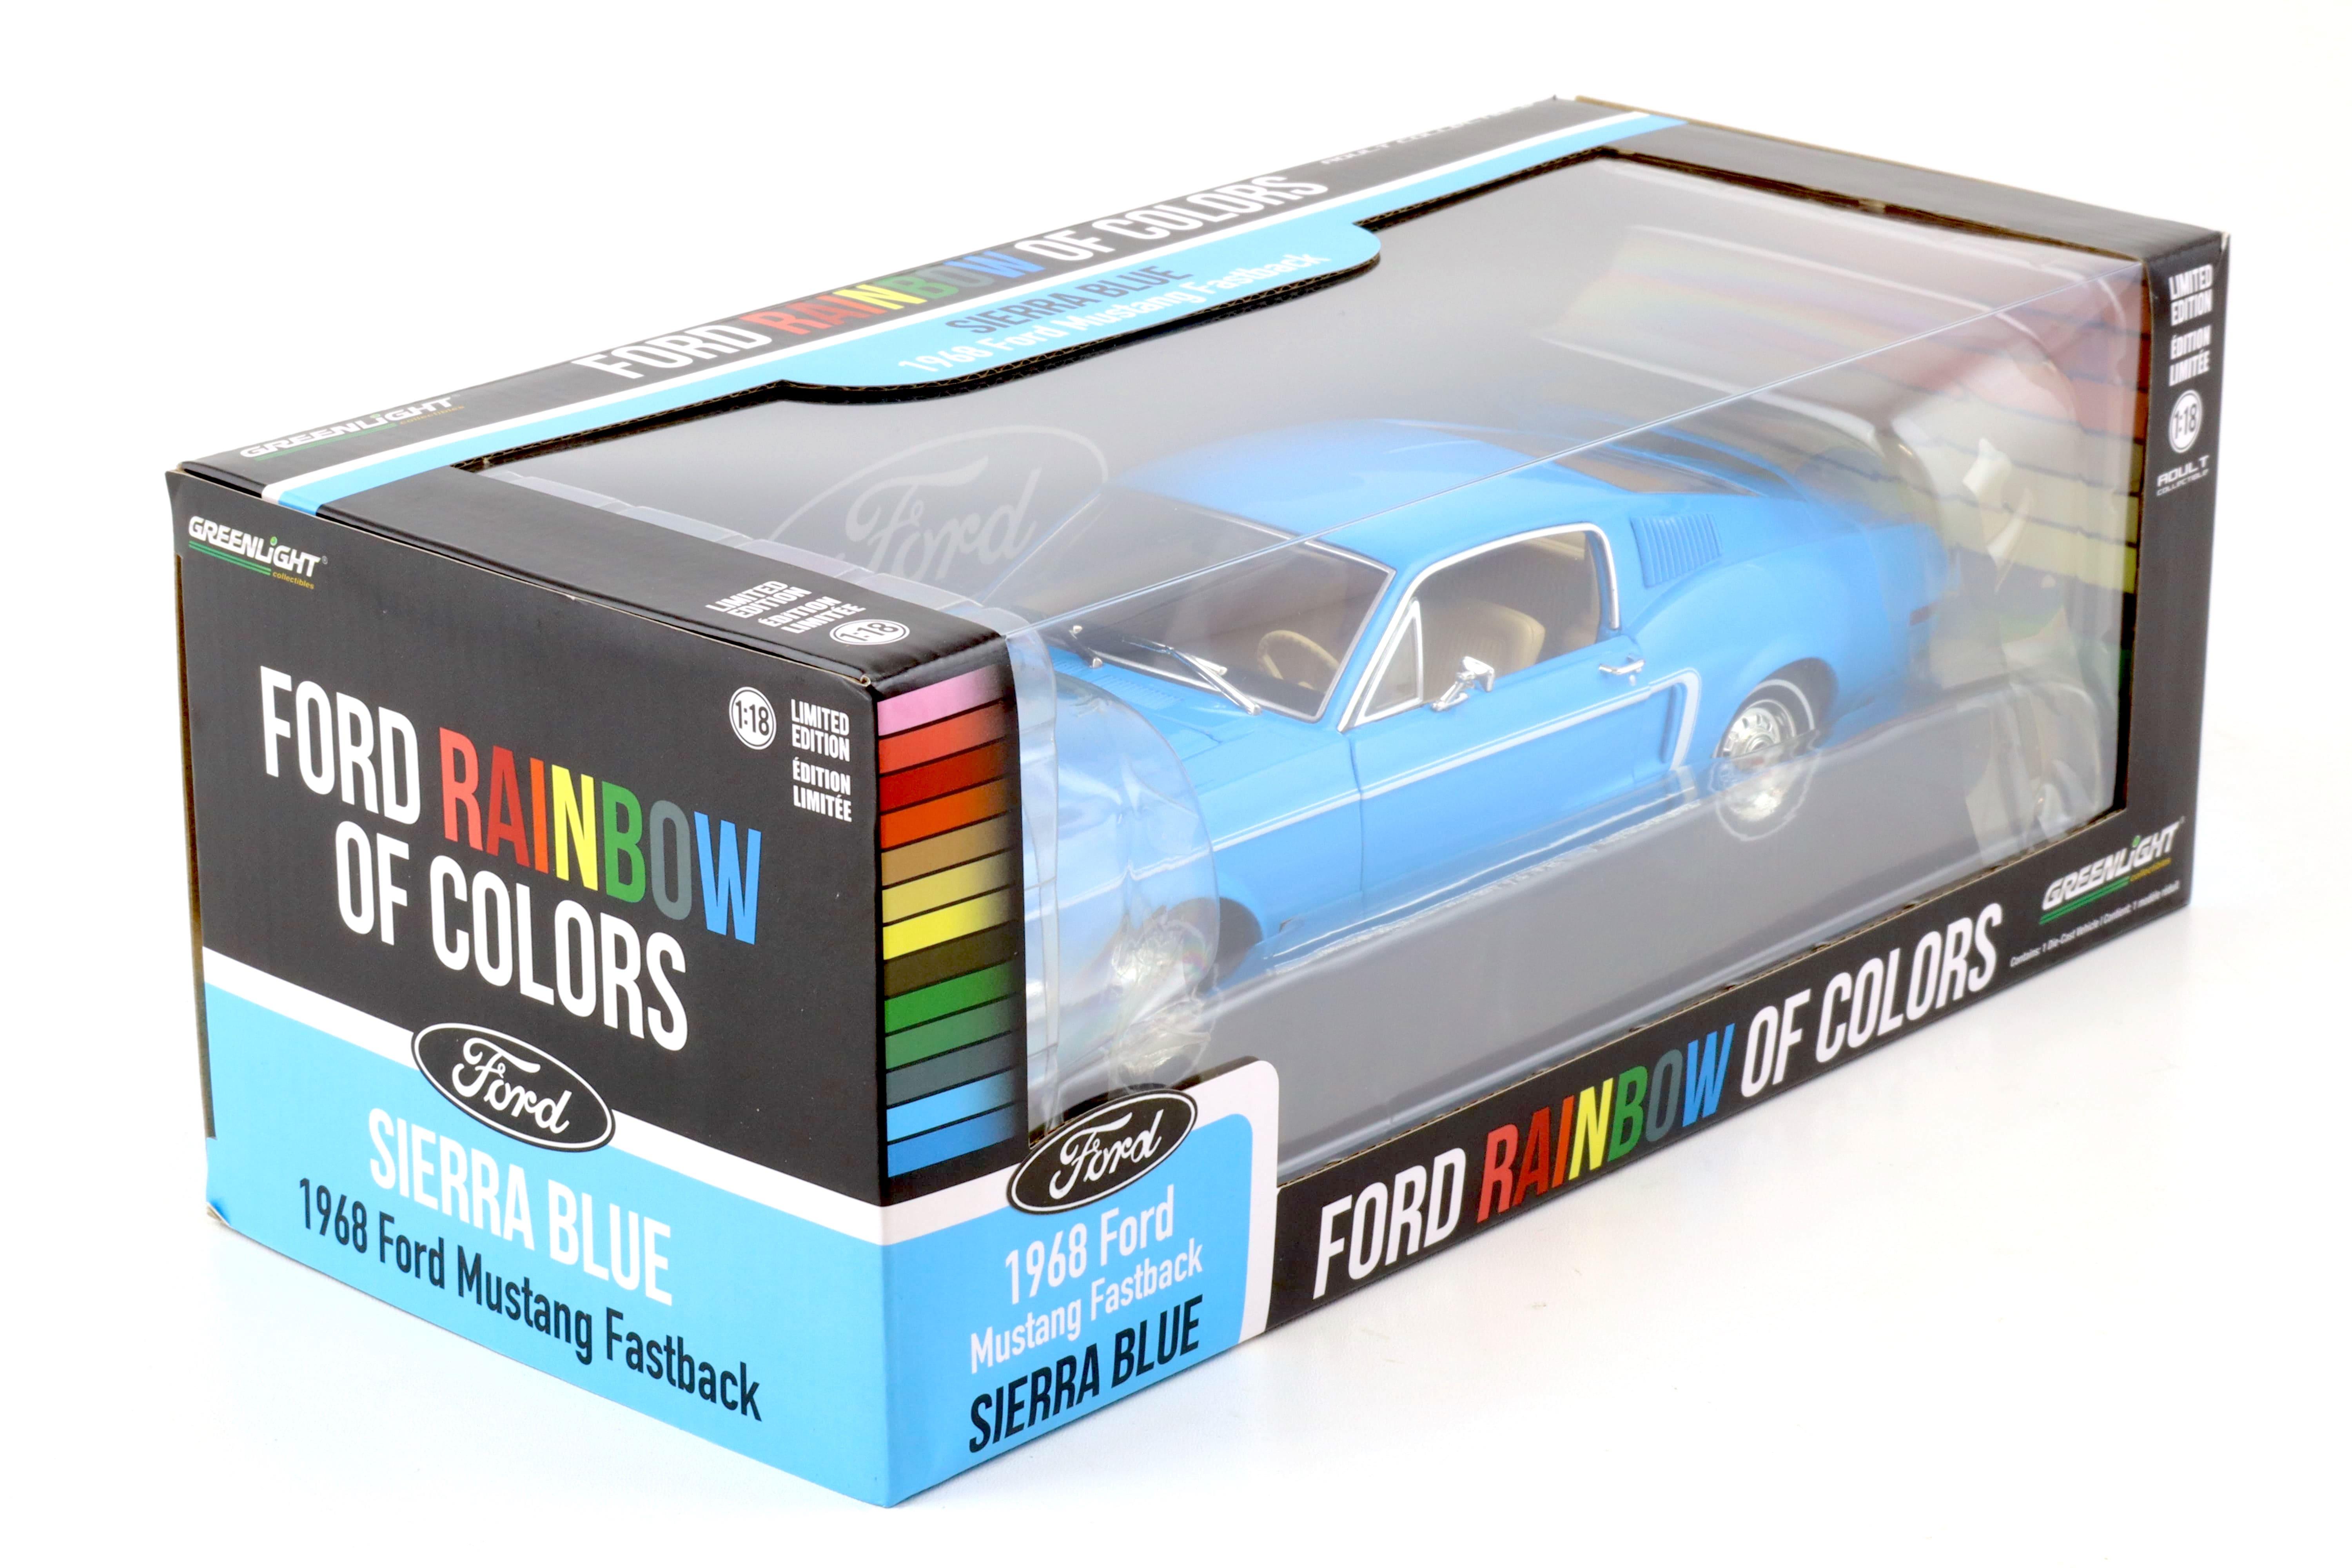 1:18 Greenlight 1968 Ford Mustang Fastback Coupe Sierra blue